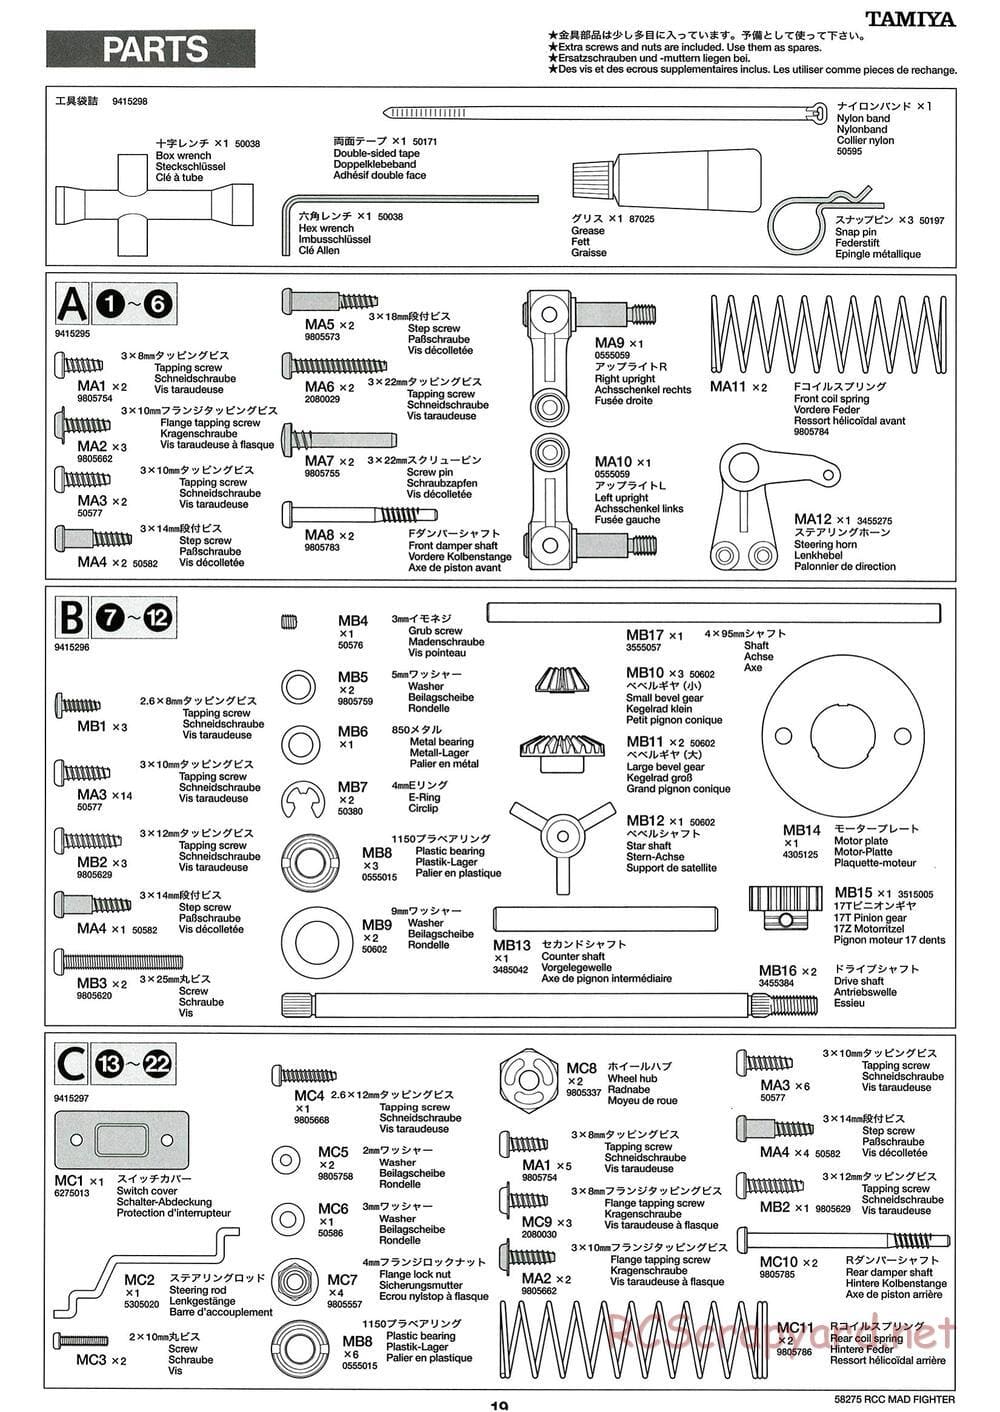 Tamiya - Mad Fighter Chassis - Manual - Page 19